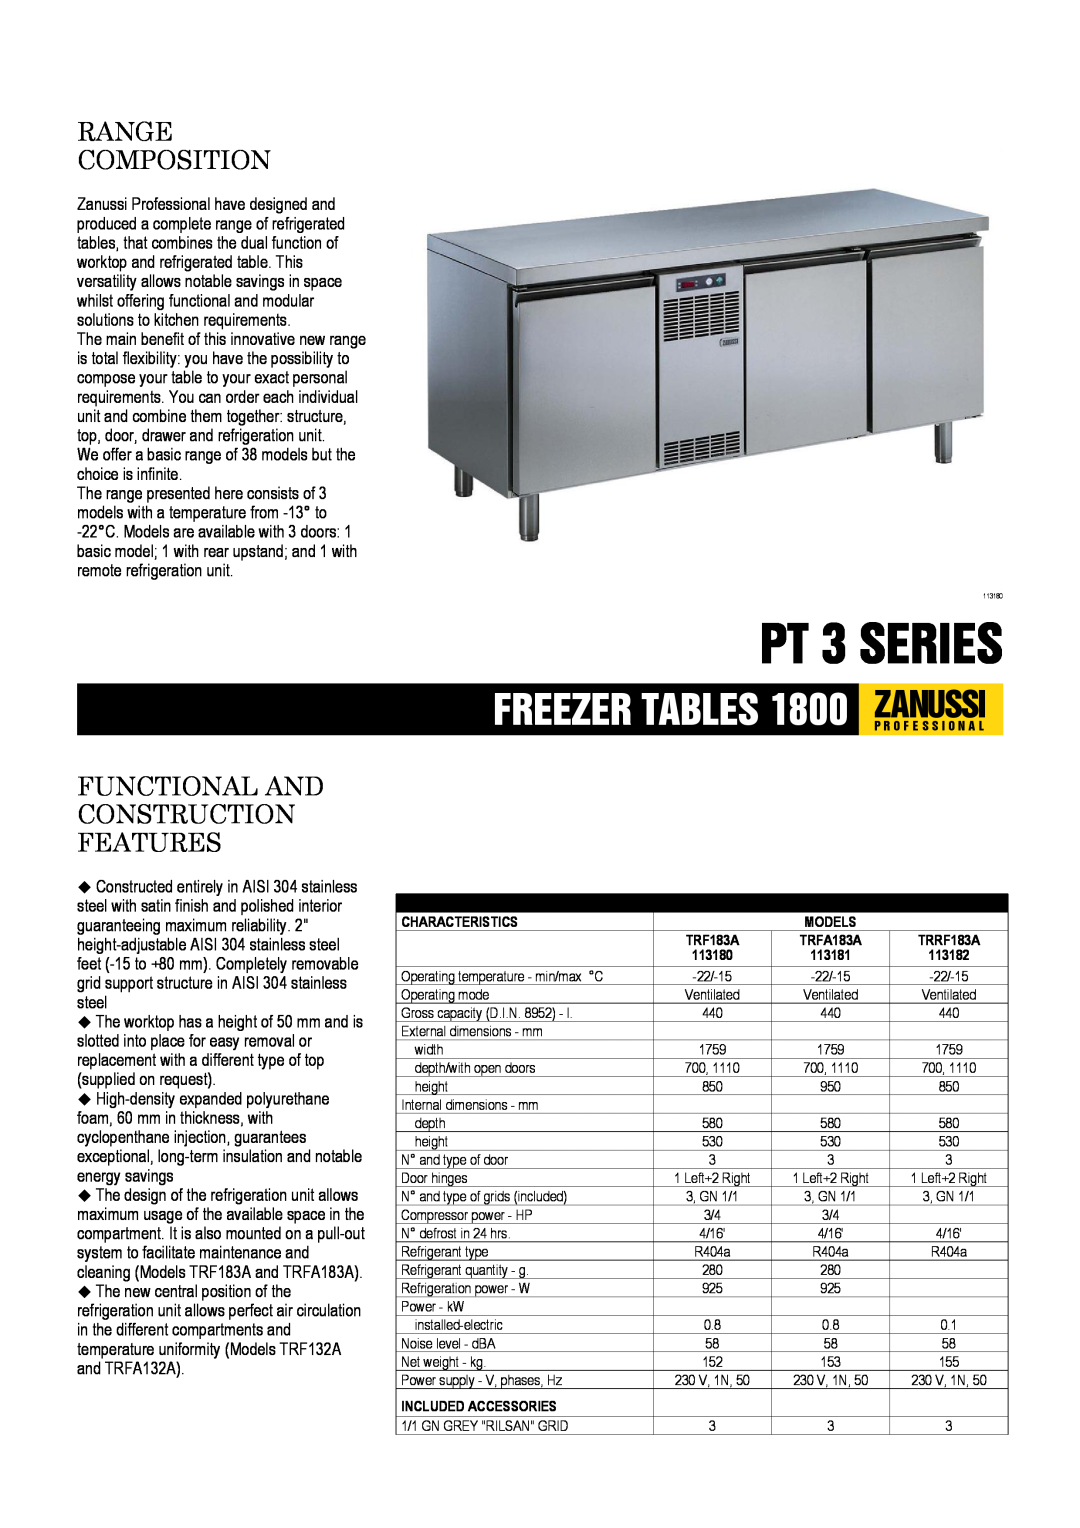 Zanussi TRF183A, TRFA183A, TRRF183A, 113180 dimensions PT 3 SERIES, Range Composition, Functional And Construction Features 